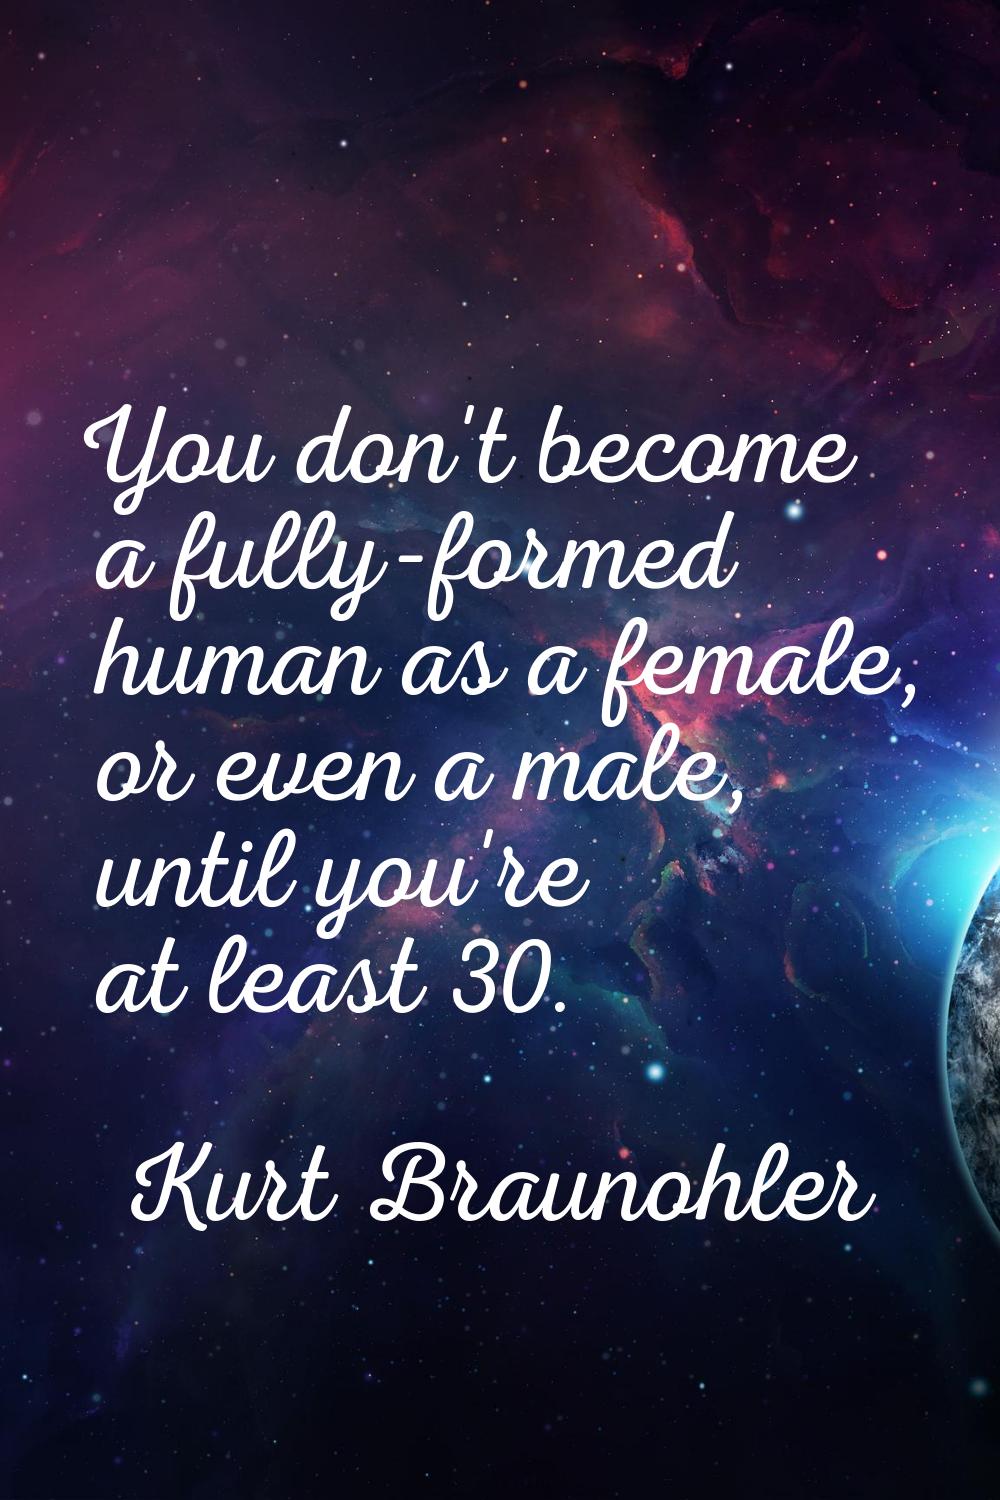 You don't become a fully-formed human as a female, or even a male, until you're at least 30.